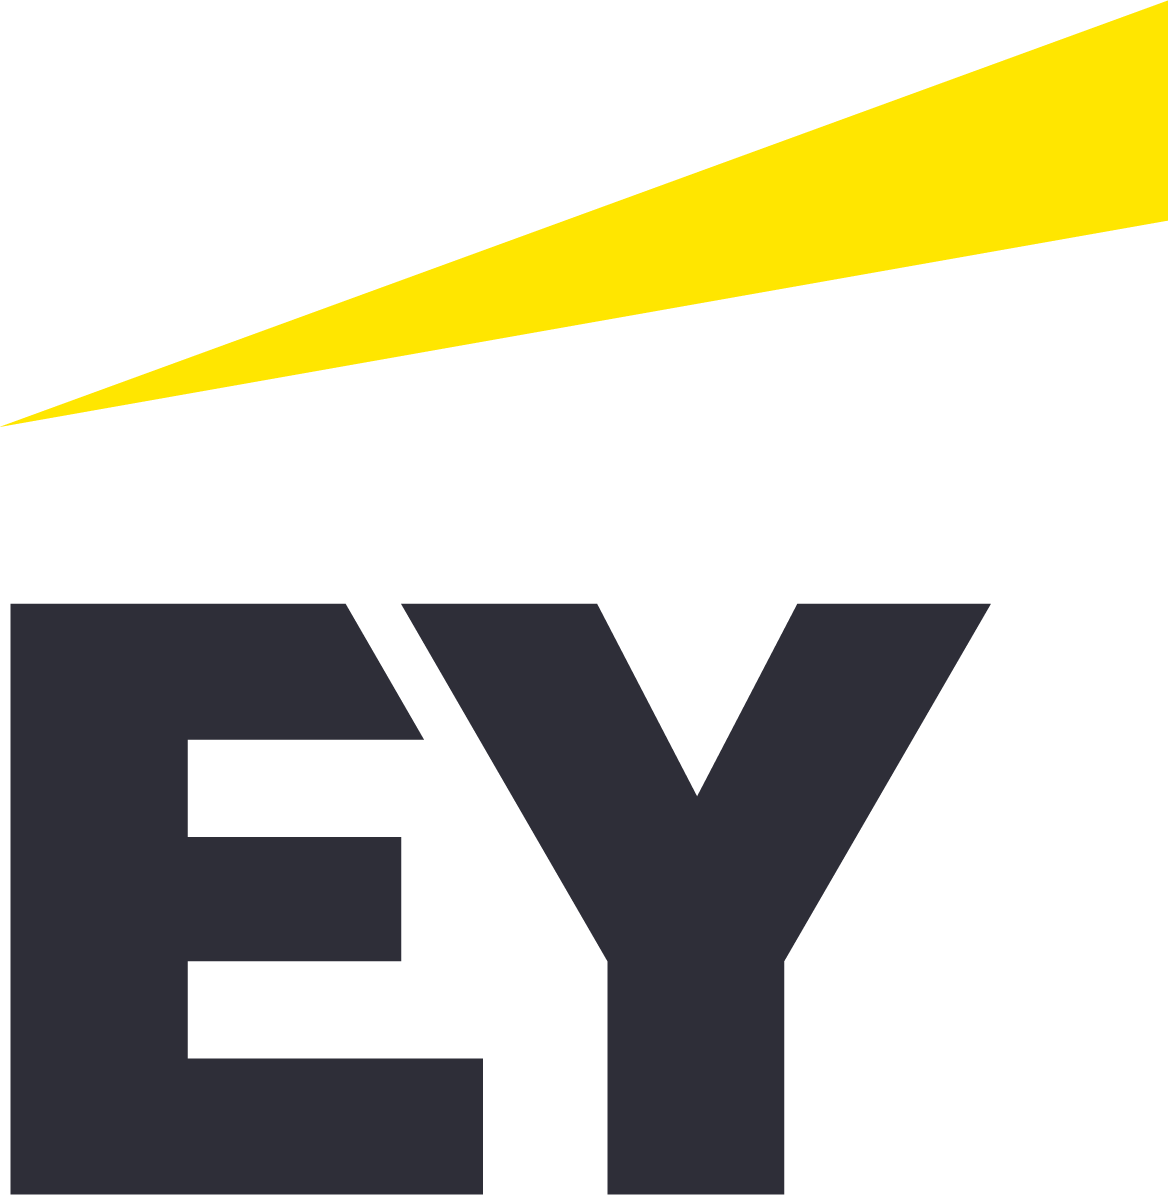 EY Global Innovations